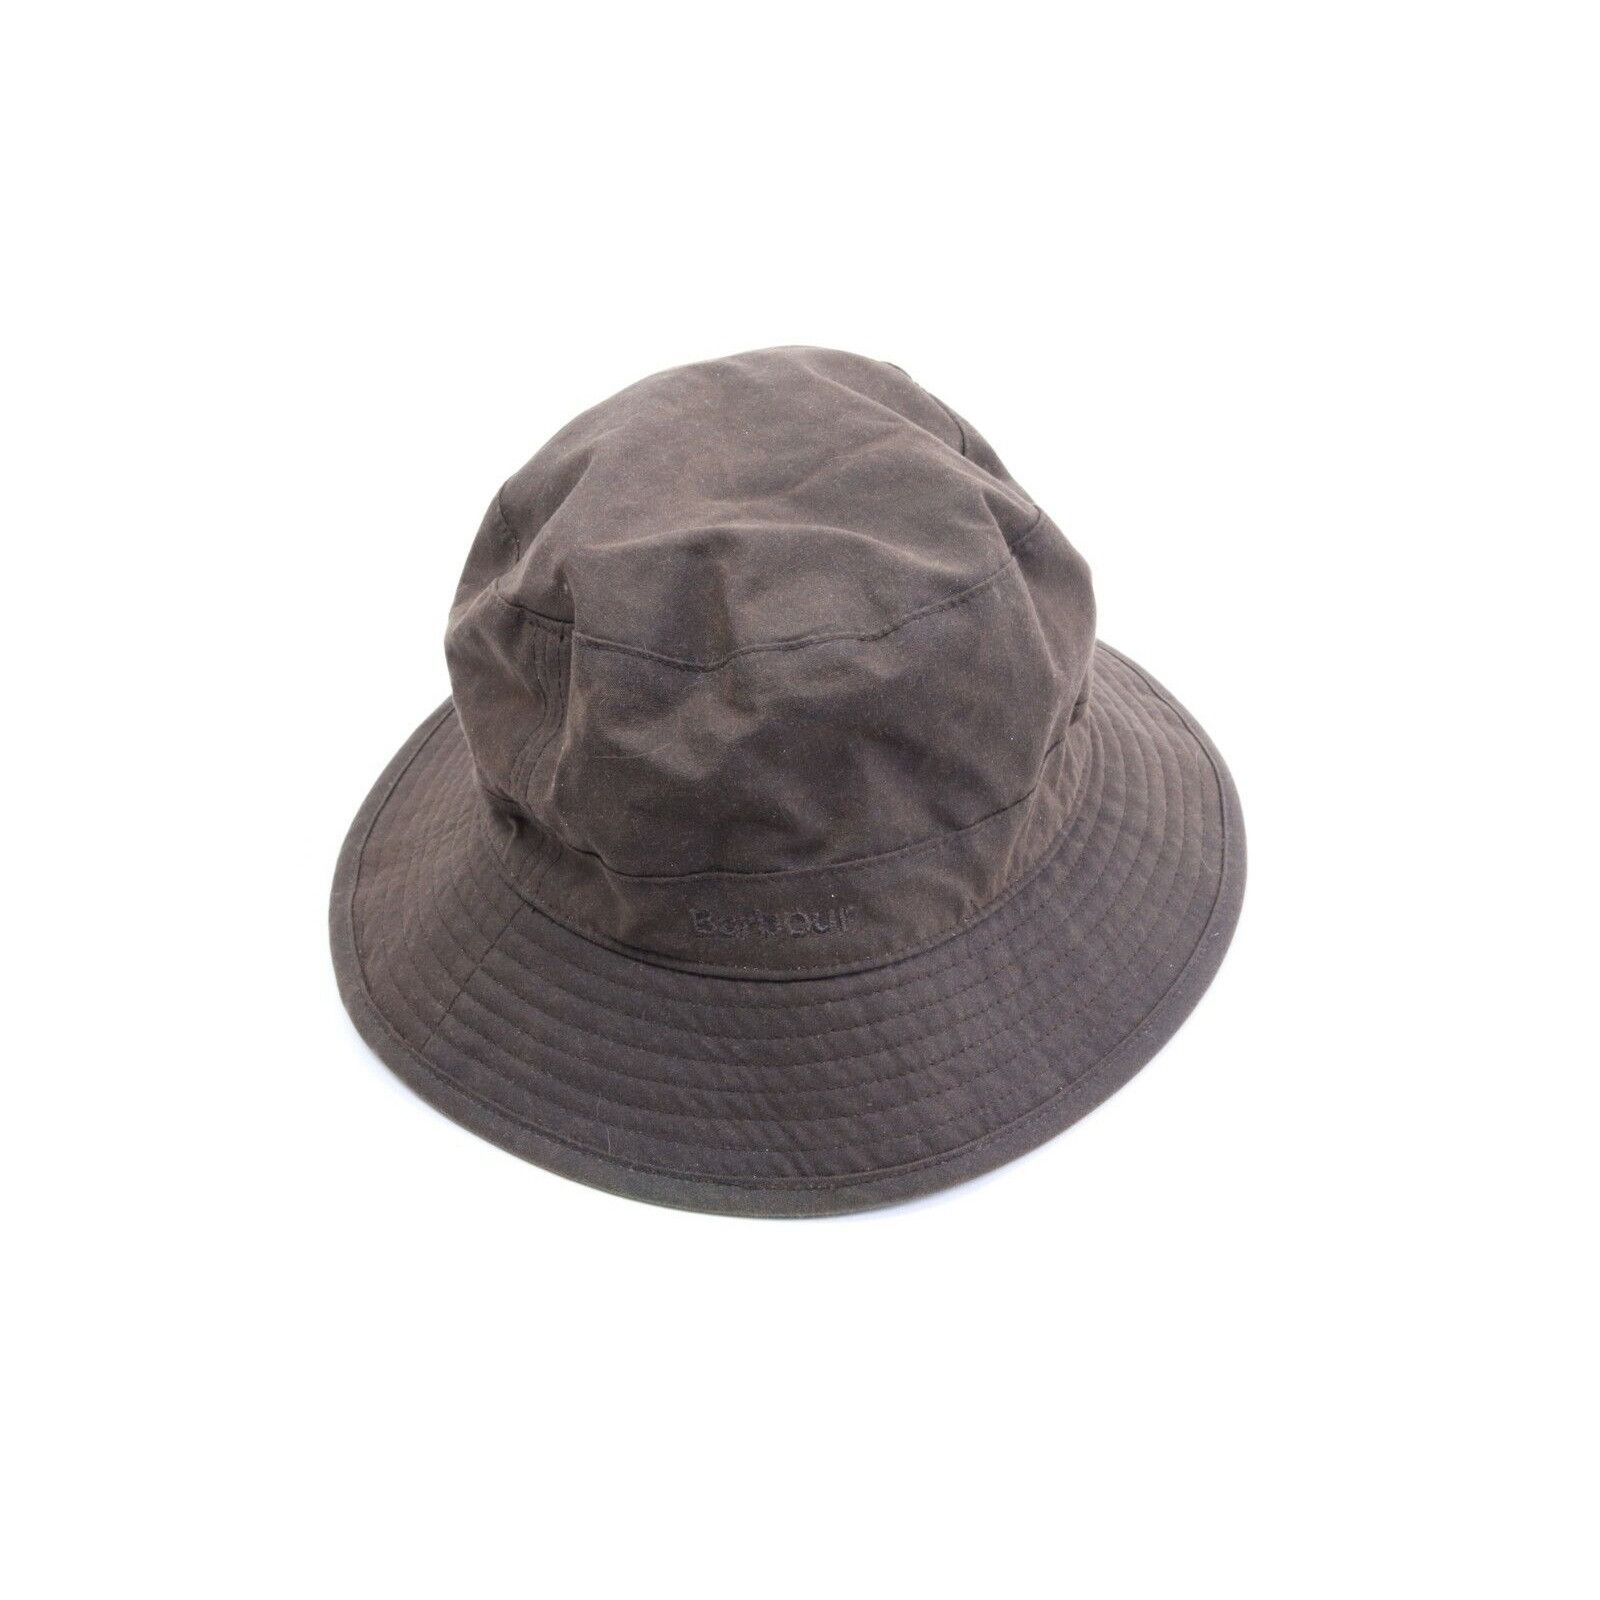 Barbour BARBOUR Brown Olive Waxed Coton Bucket Hat | Grailed